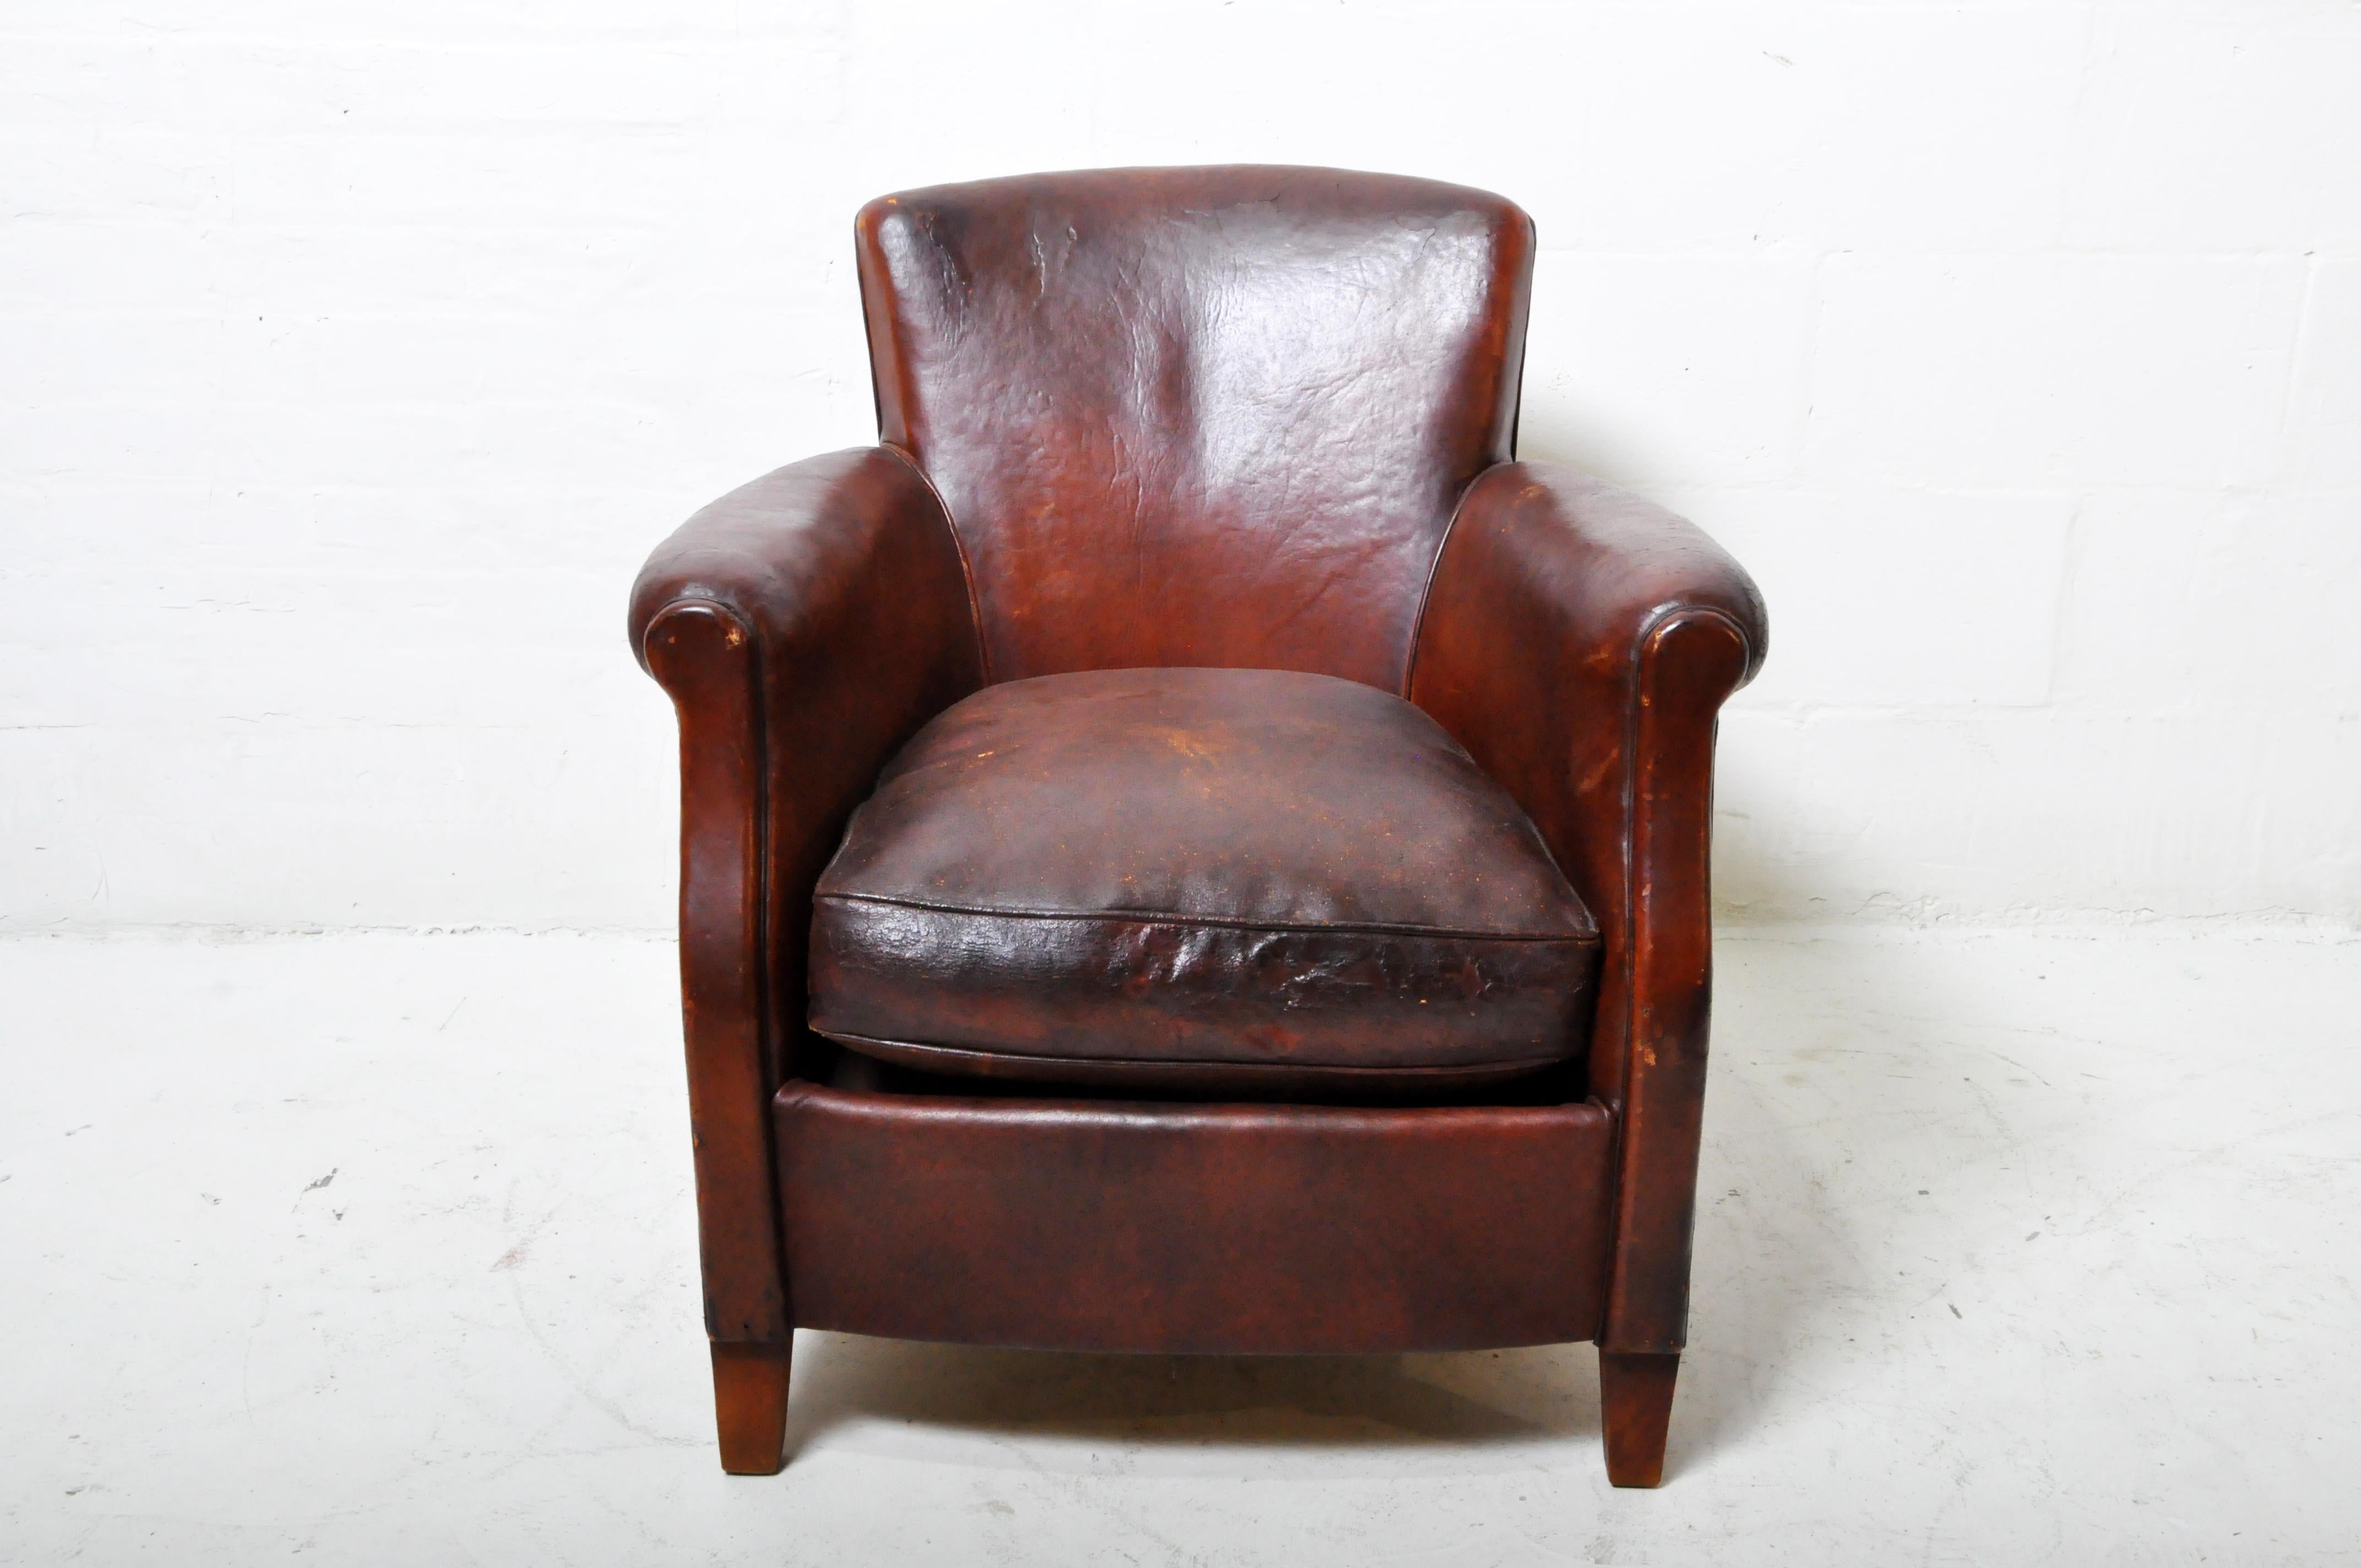 A rare smaller-framed French Art Deco club chair in sheep skin. The leather seat cushion is vintage but not original to the piece. Springs are in good condition and leather has only minor abrasions and imperfections.